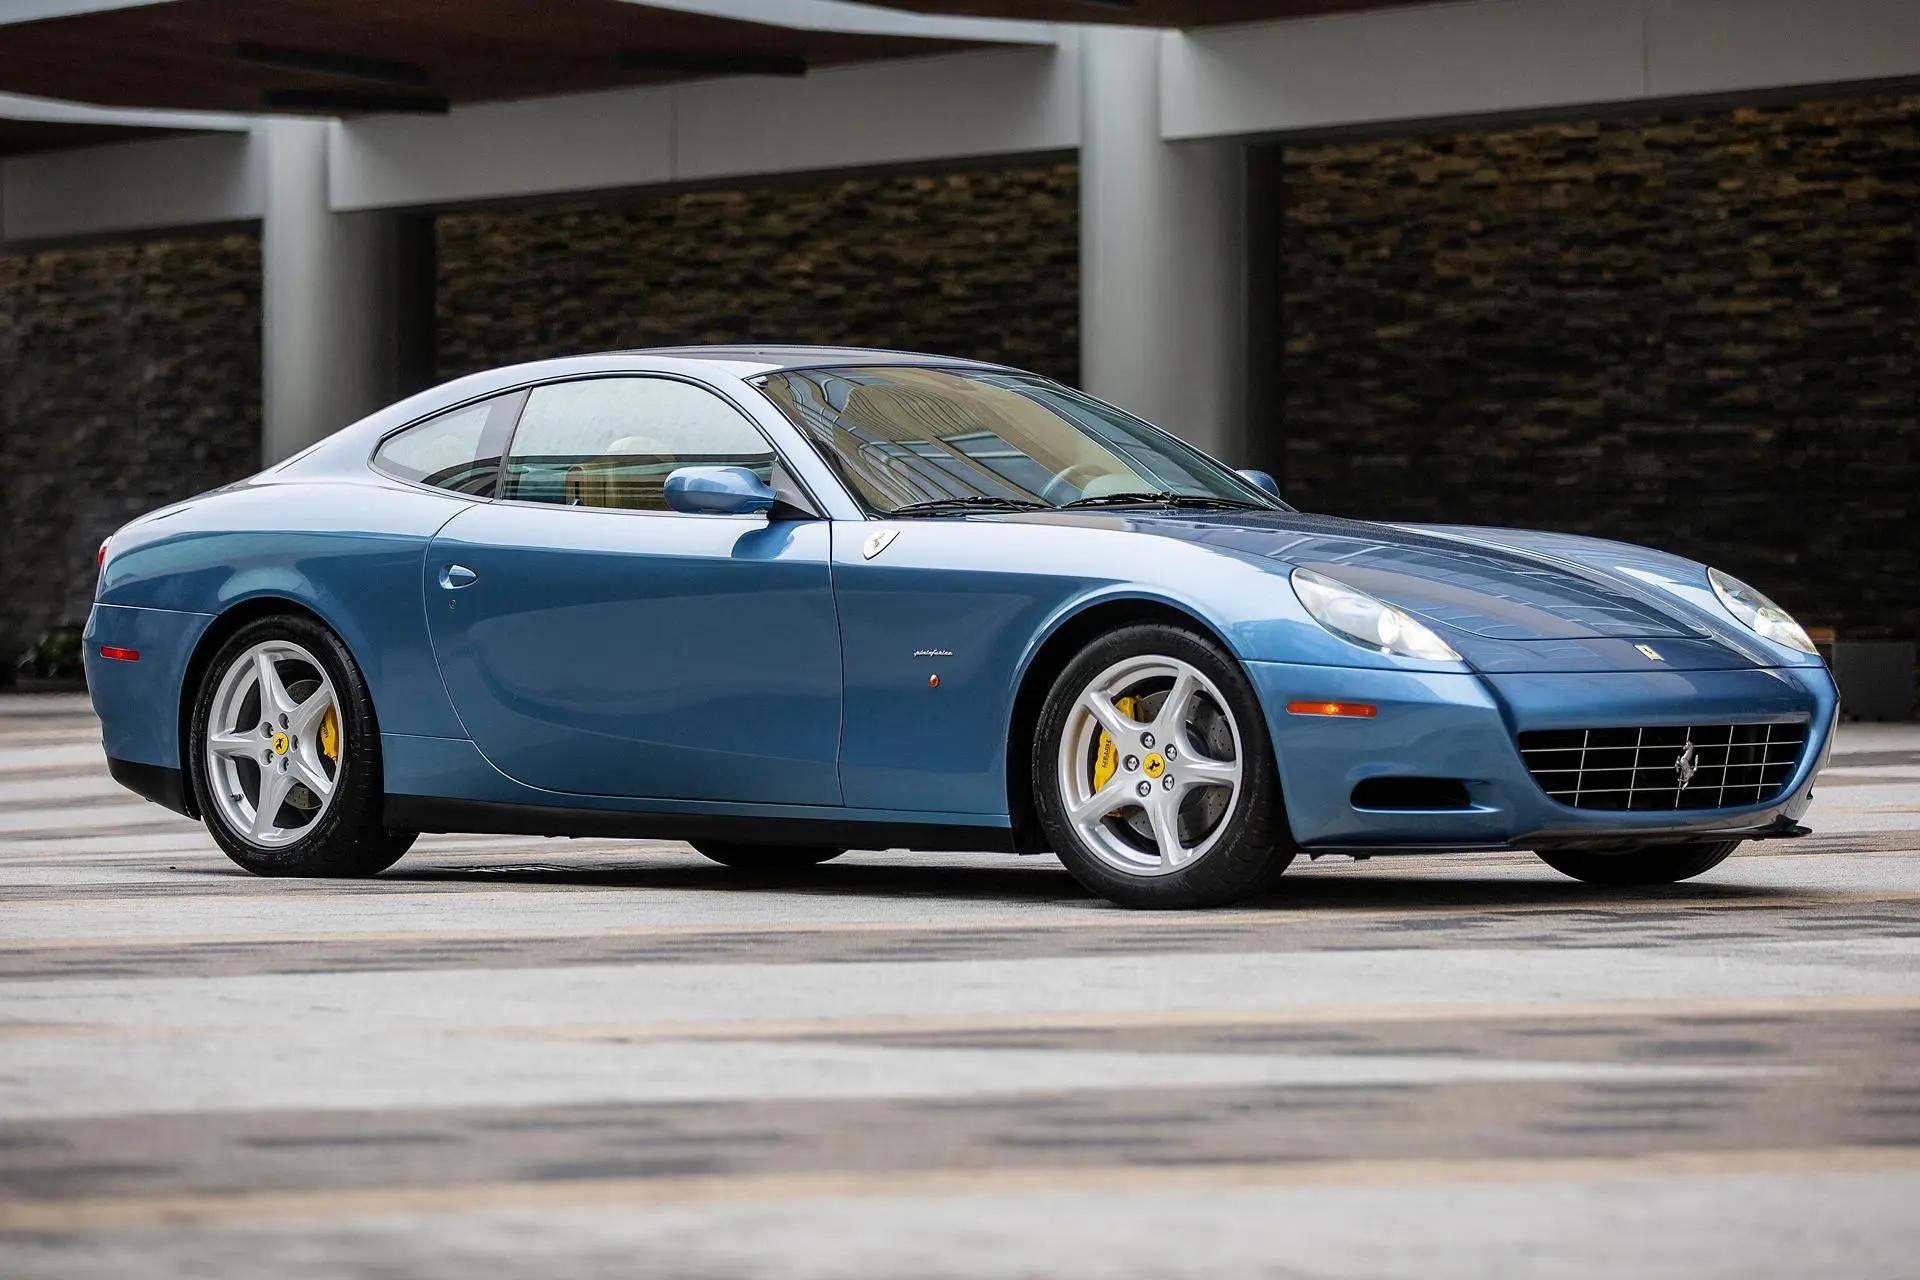 ferrari 612 production numbers - How much was a Ferrari 612 new